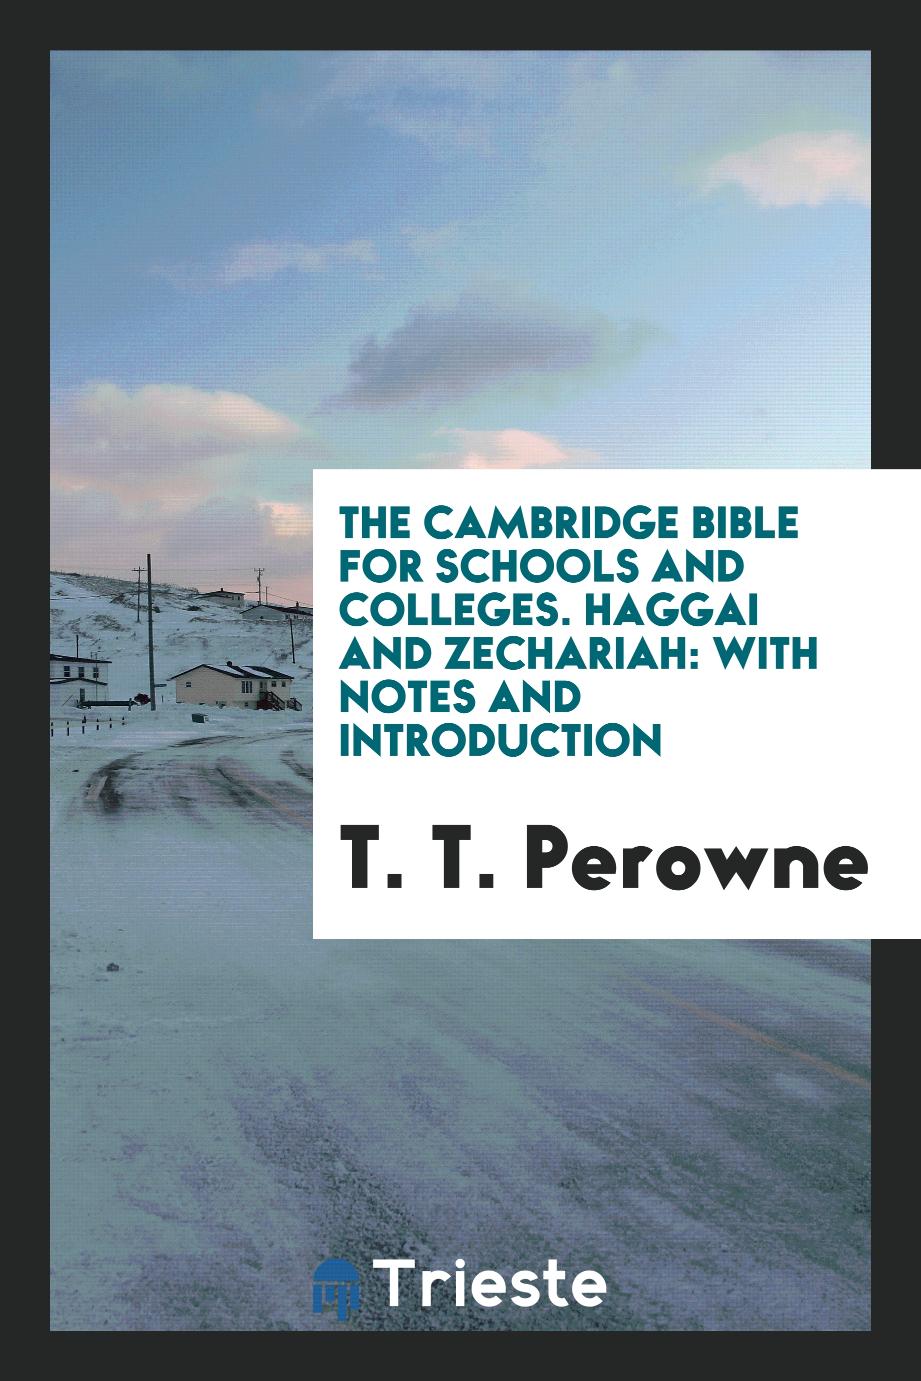 The Cambridge Bible for schools and colleges. Haggai and Zechariah: with notes and introduction